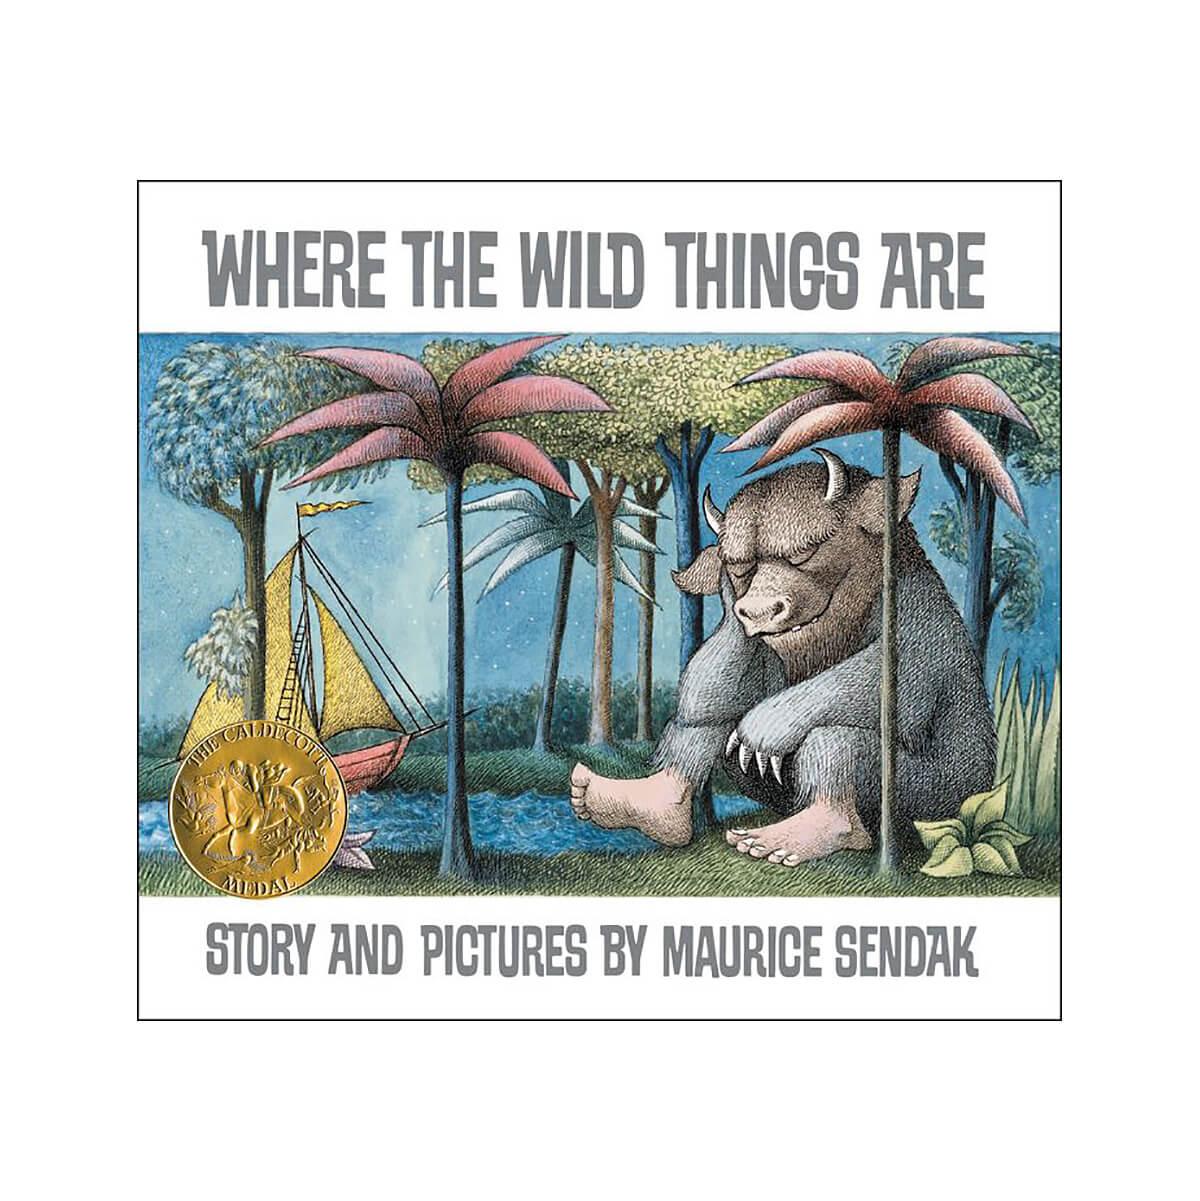 Stanley Introduces Wild Imaginations Kids Collection